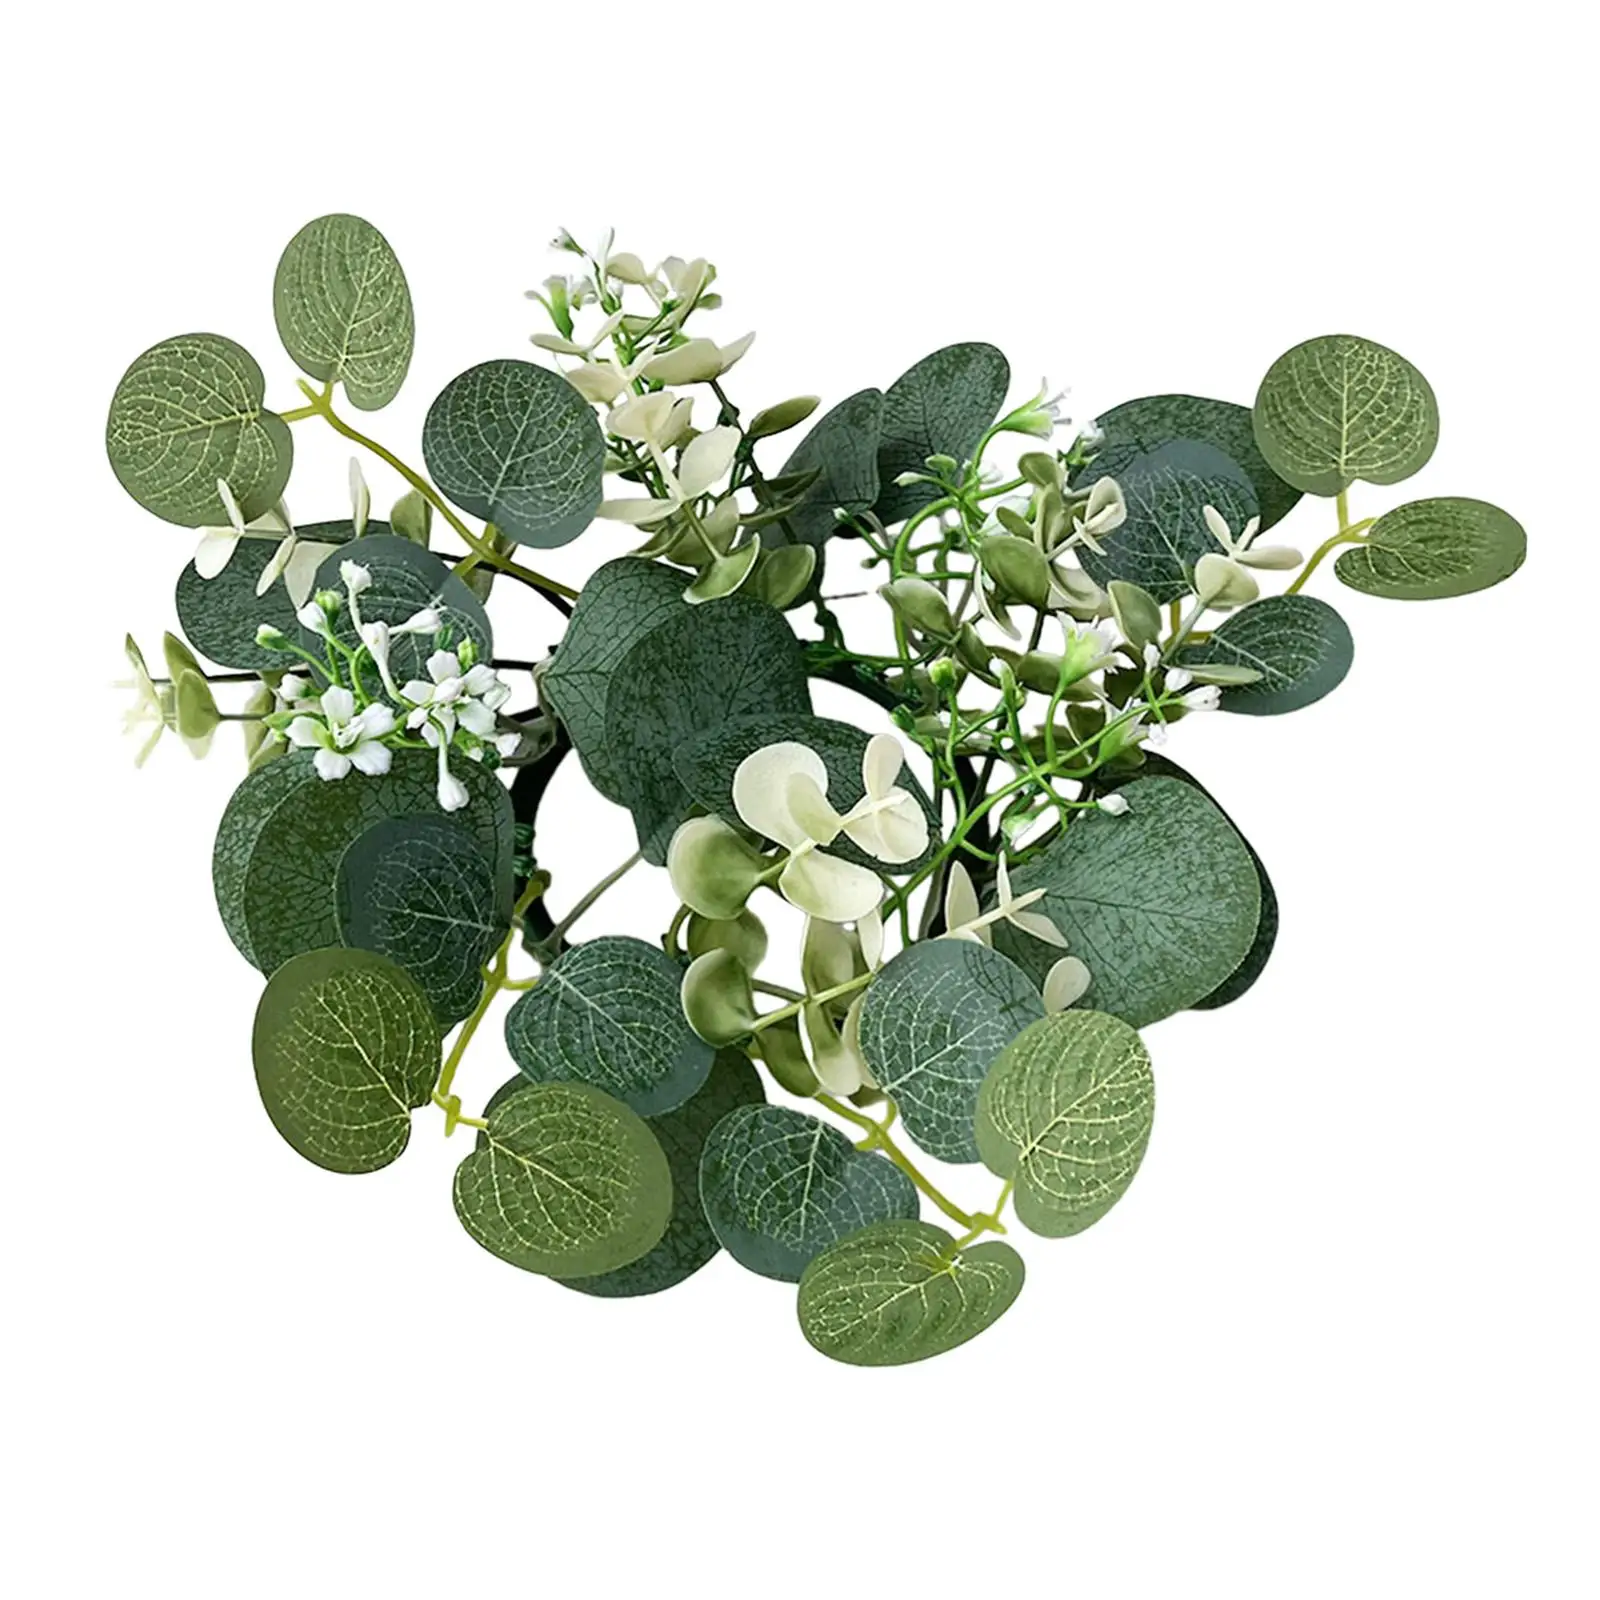 Artificial Eucalyptus Wreath Decoration 9.8inch Greenery Garland Rustic Candle Ring for Tabletop Easter Kitchen Dining Room Door